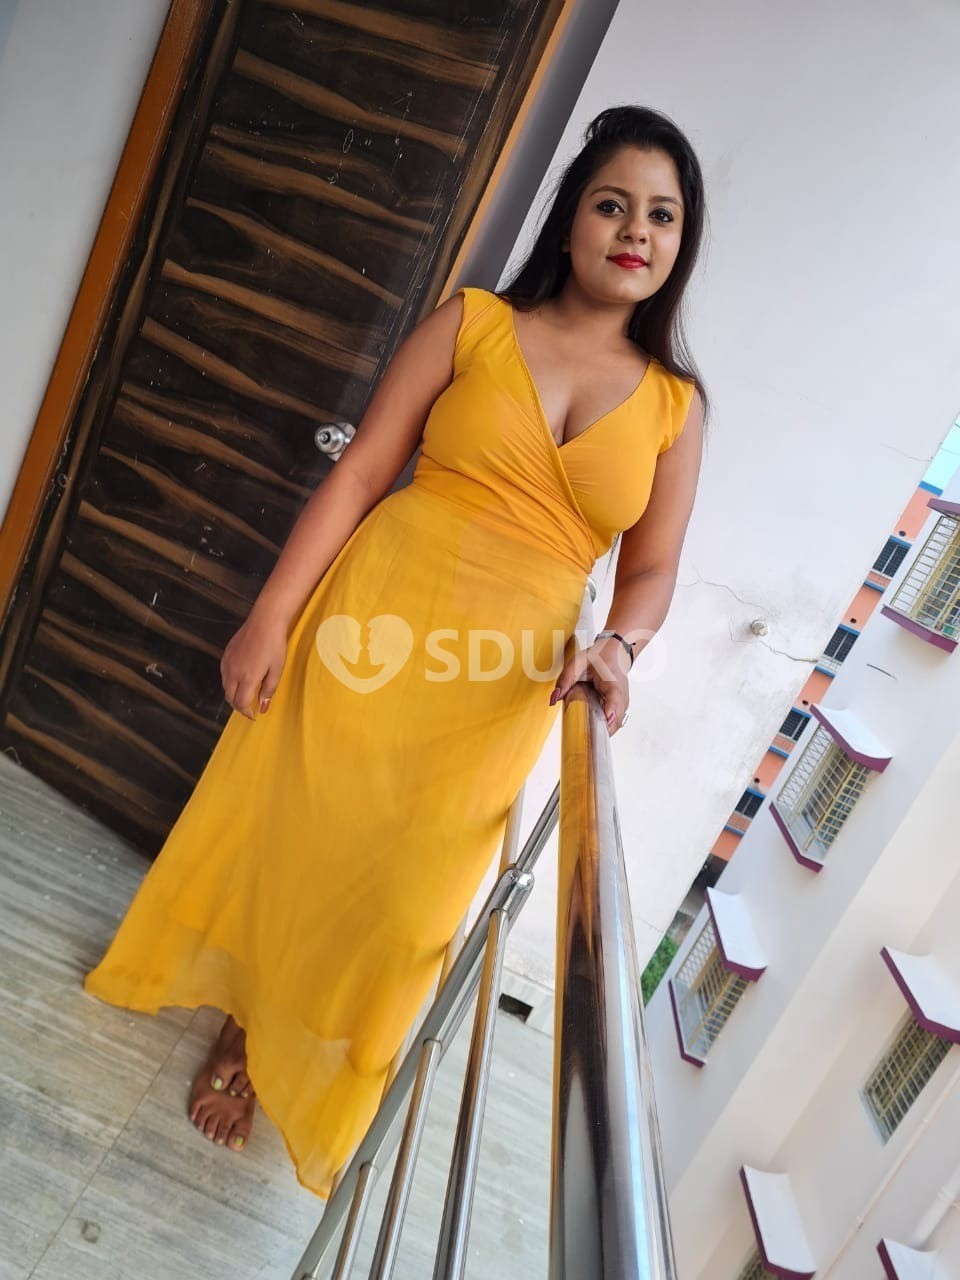 86906/17690 NUNGAMBAKKAM CHENNAI  ✅ 24x7 AFFORDABLE CHEAPEST RATE SAFE COLLEGE GIRL AVAILABLE IN-CALL OUT-CALL AVAILAB